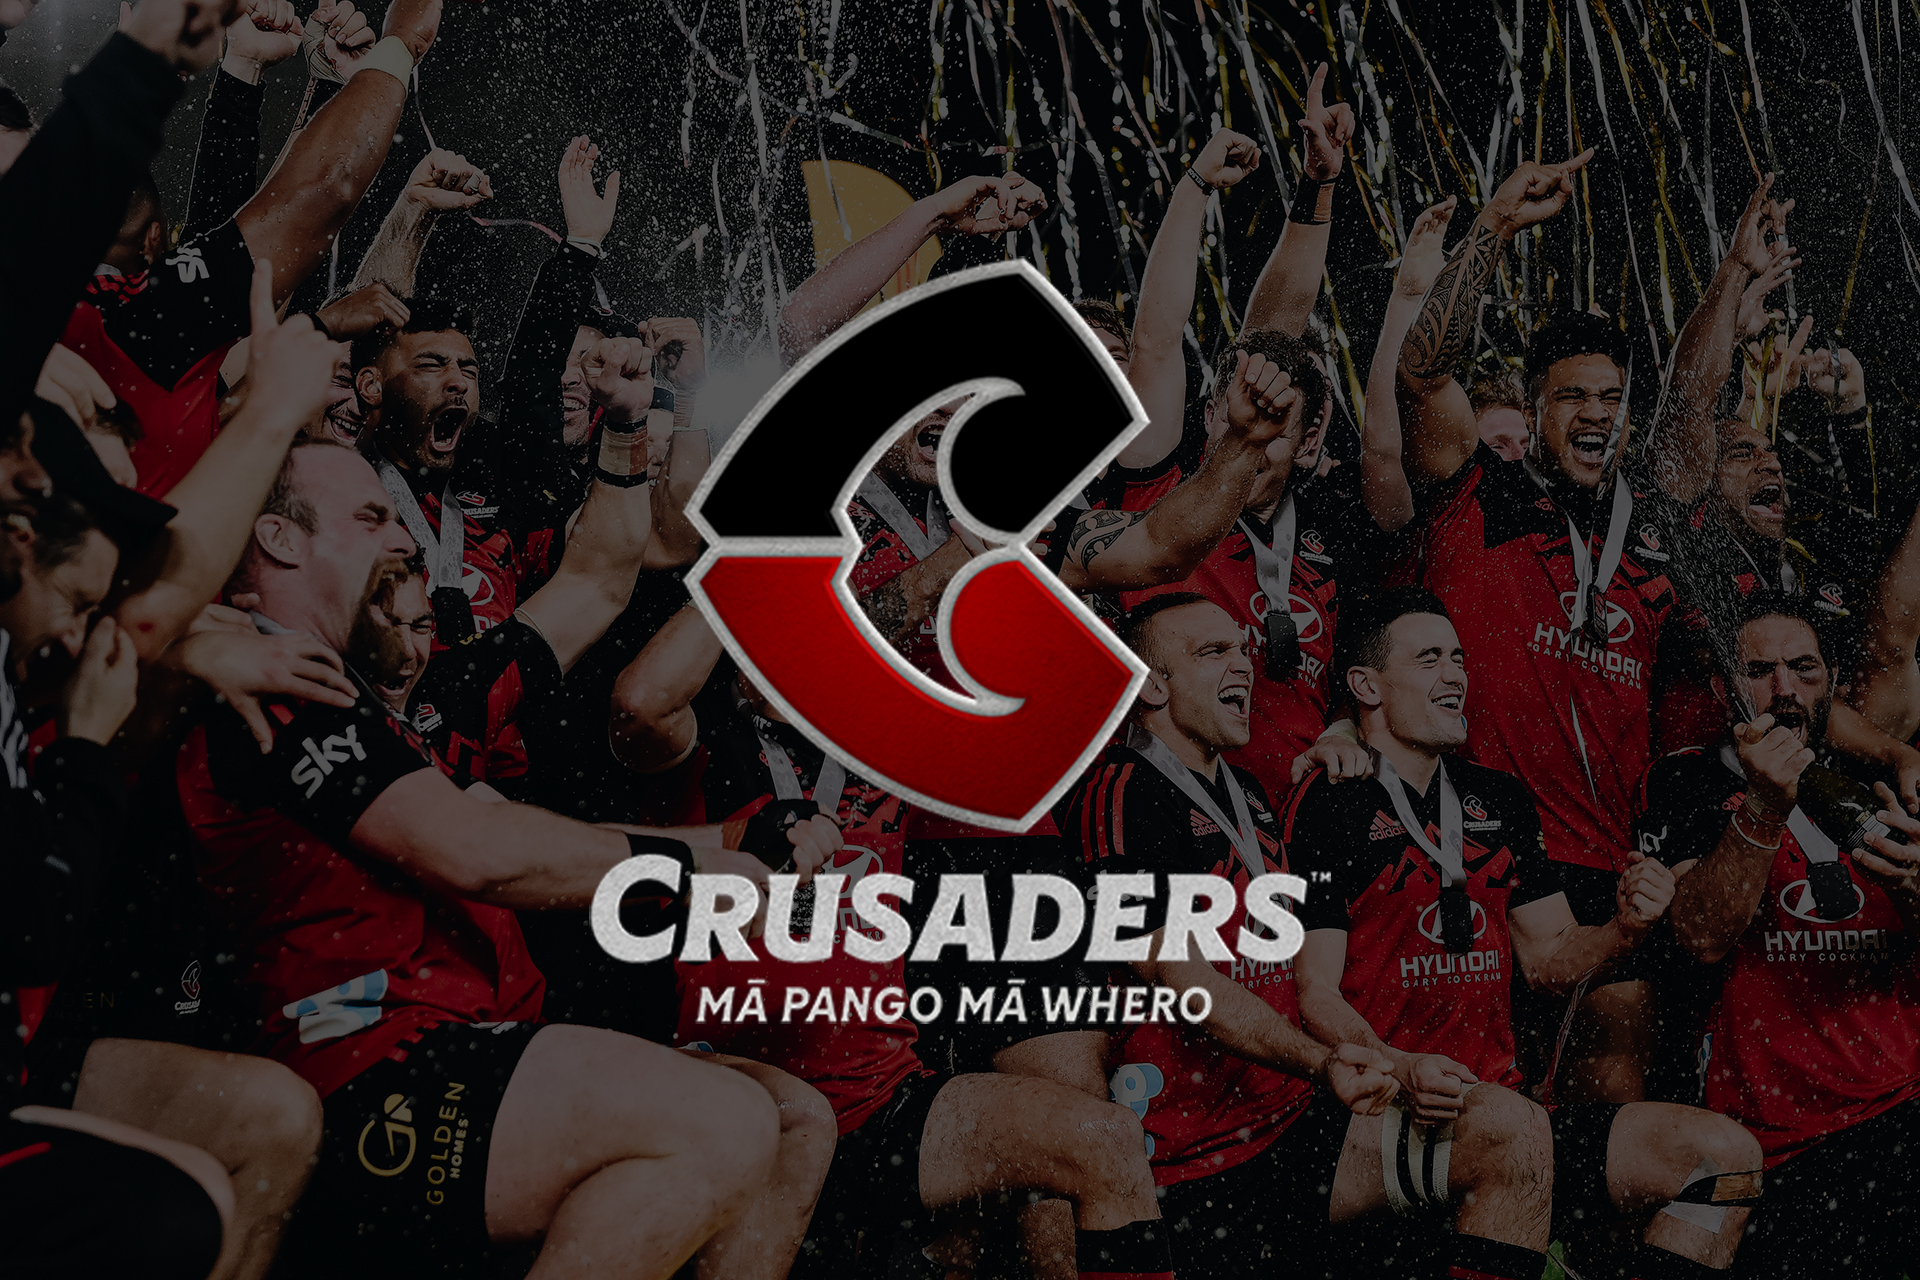 Crusaders logo overlayed on Crusaders team photo for VIP Frames and Trusses website